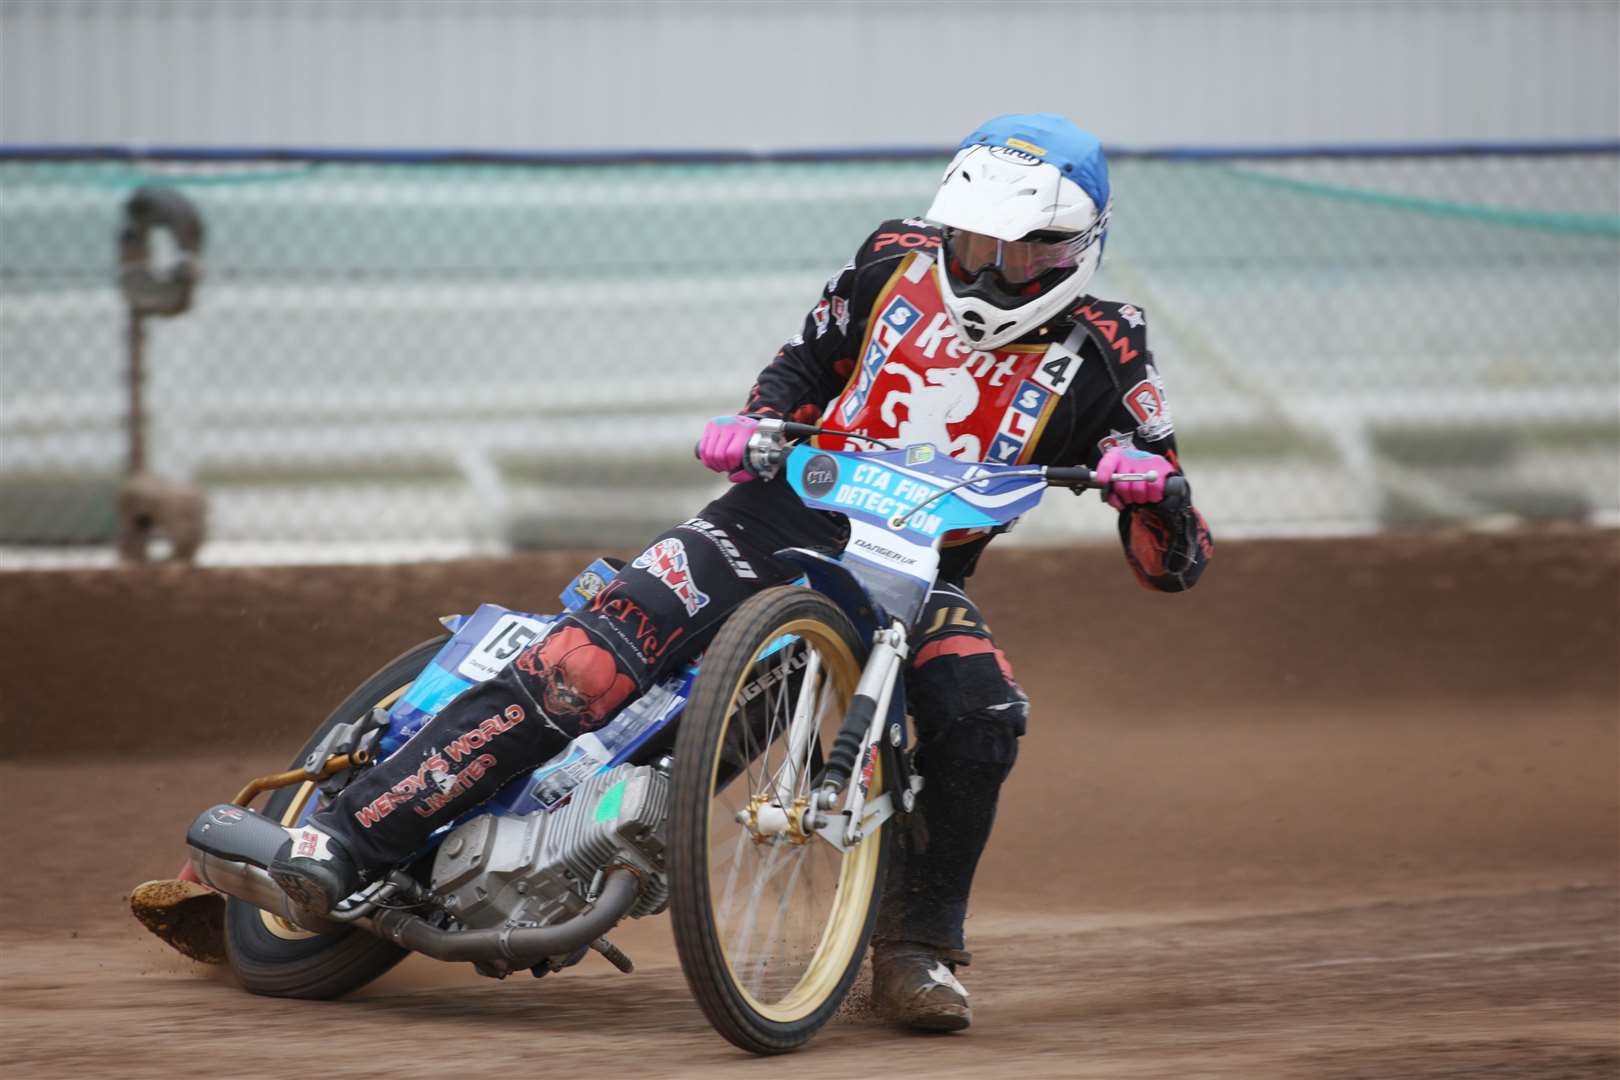 Danny Ayres for Kent Kings against Mildenhall Fen Tigers at Central Park in Sittingbourne. Picture: John Westhrop